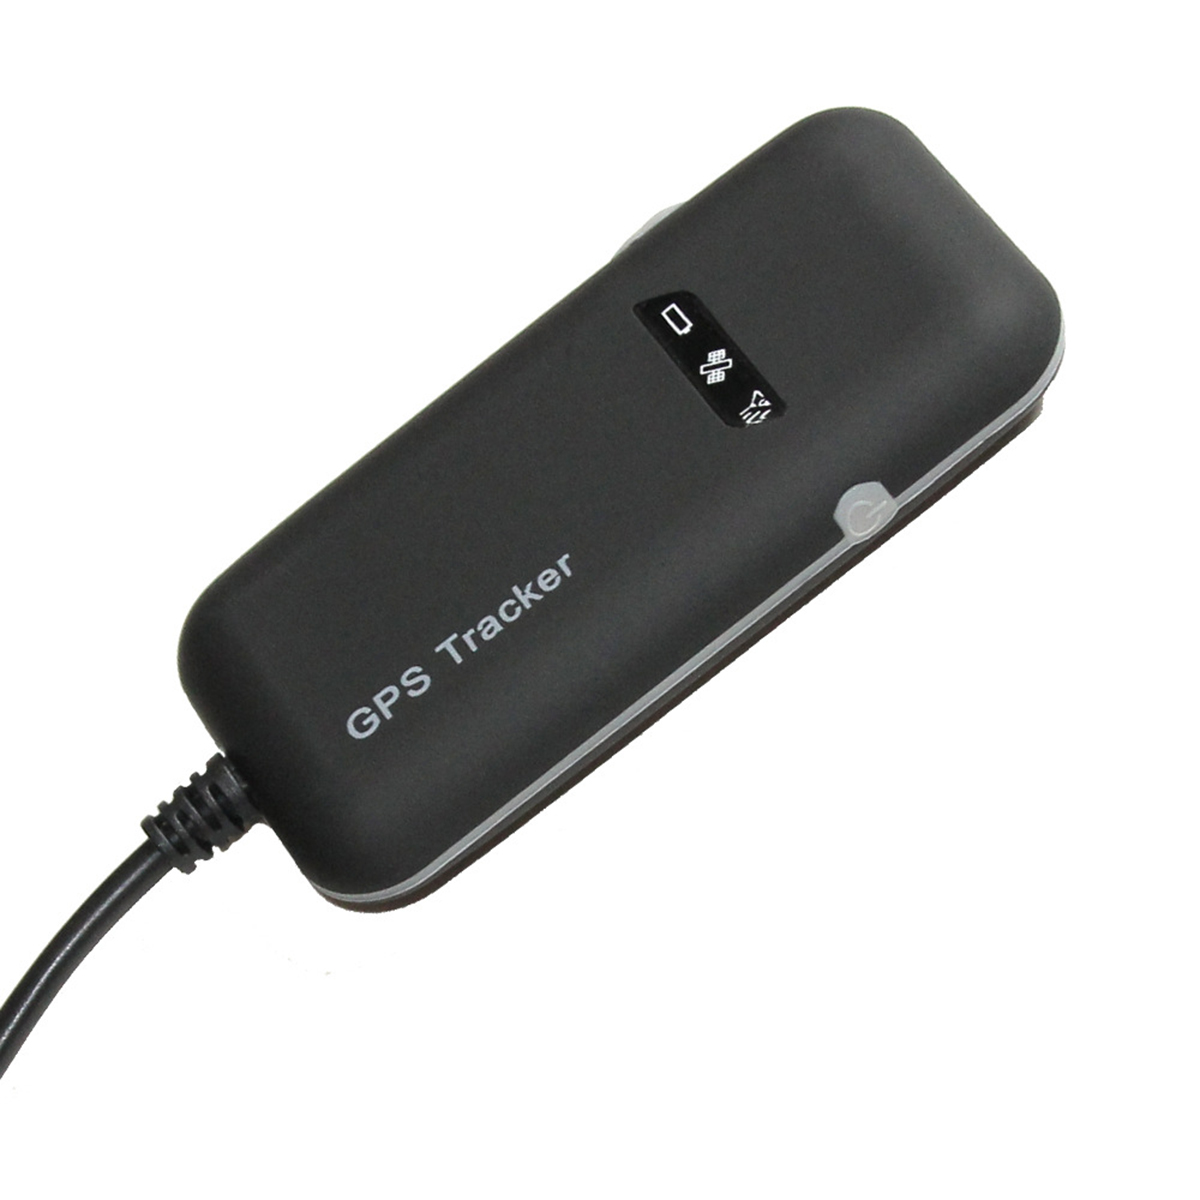 Global-Vniversal-GT02A-GSM-GPRS-Car-GPS-Tracker-Real-Time-Tracking-Device-Anti-Theft-1411071